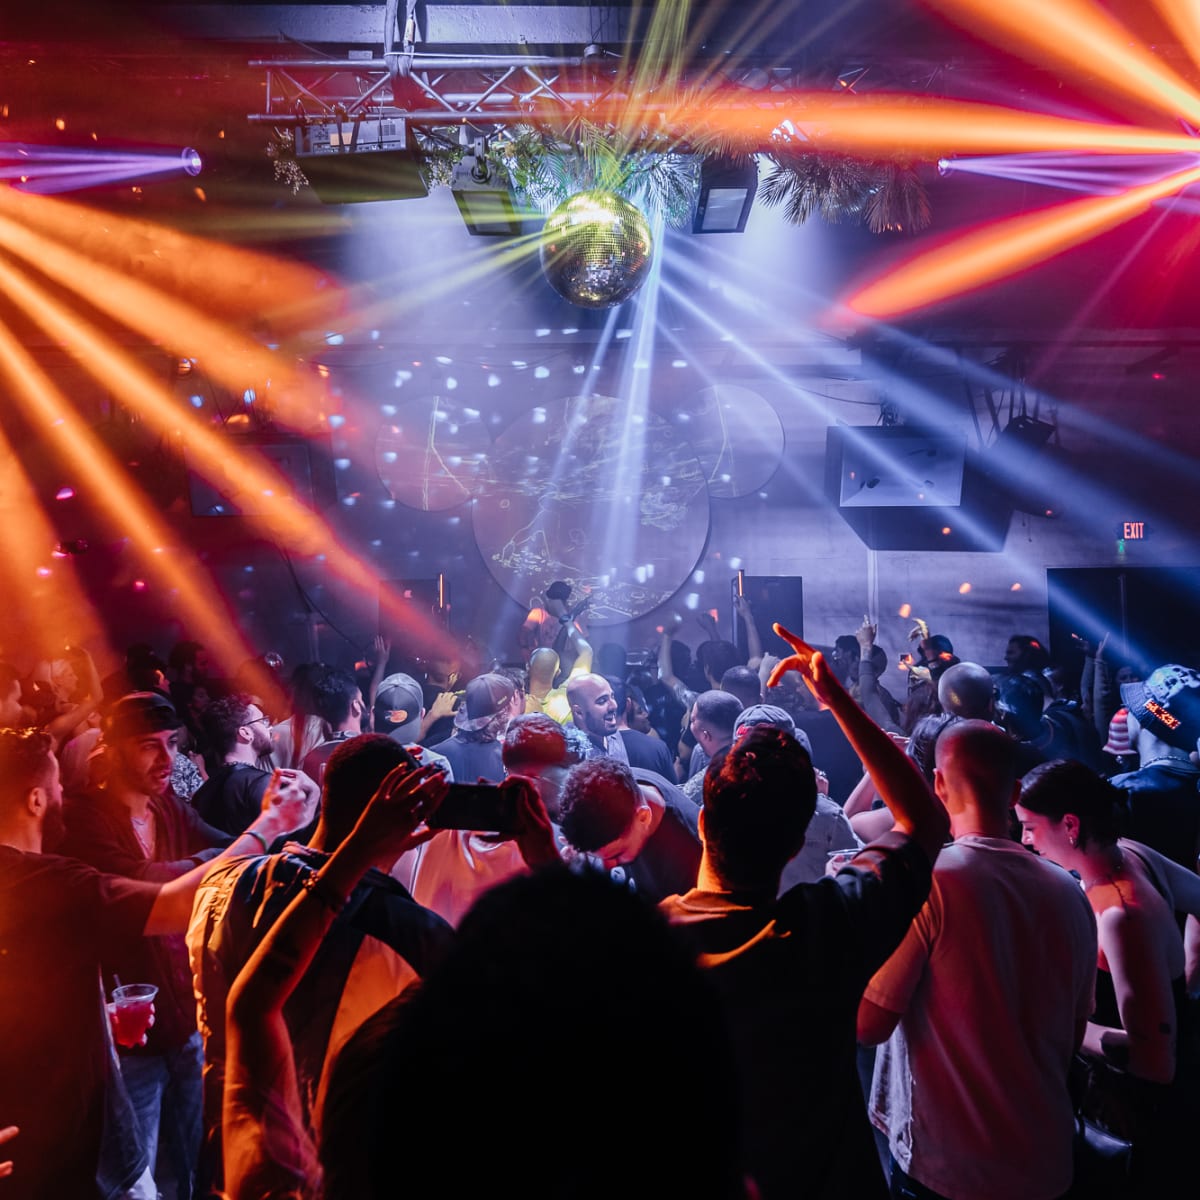 Three New Clubs Join a Rebounding Nightlife Scene in D.C. - Eater DC